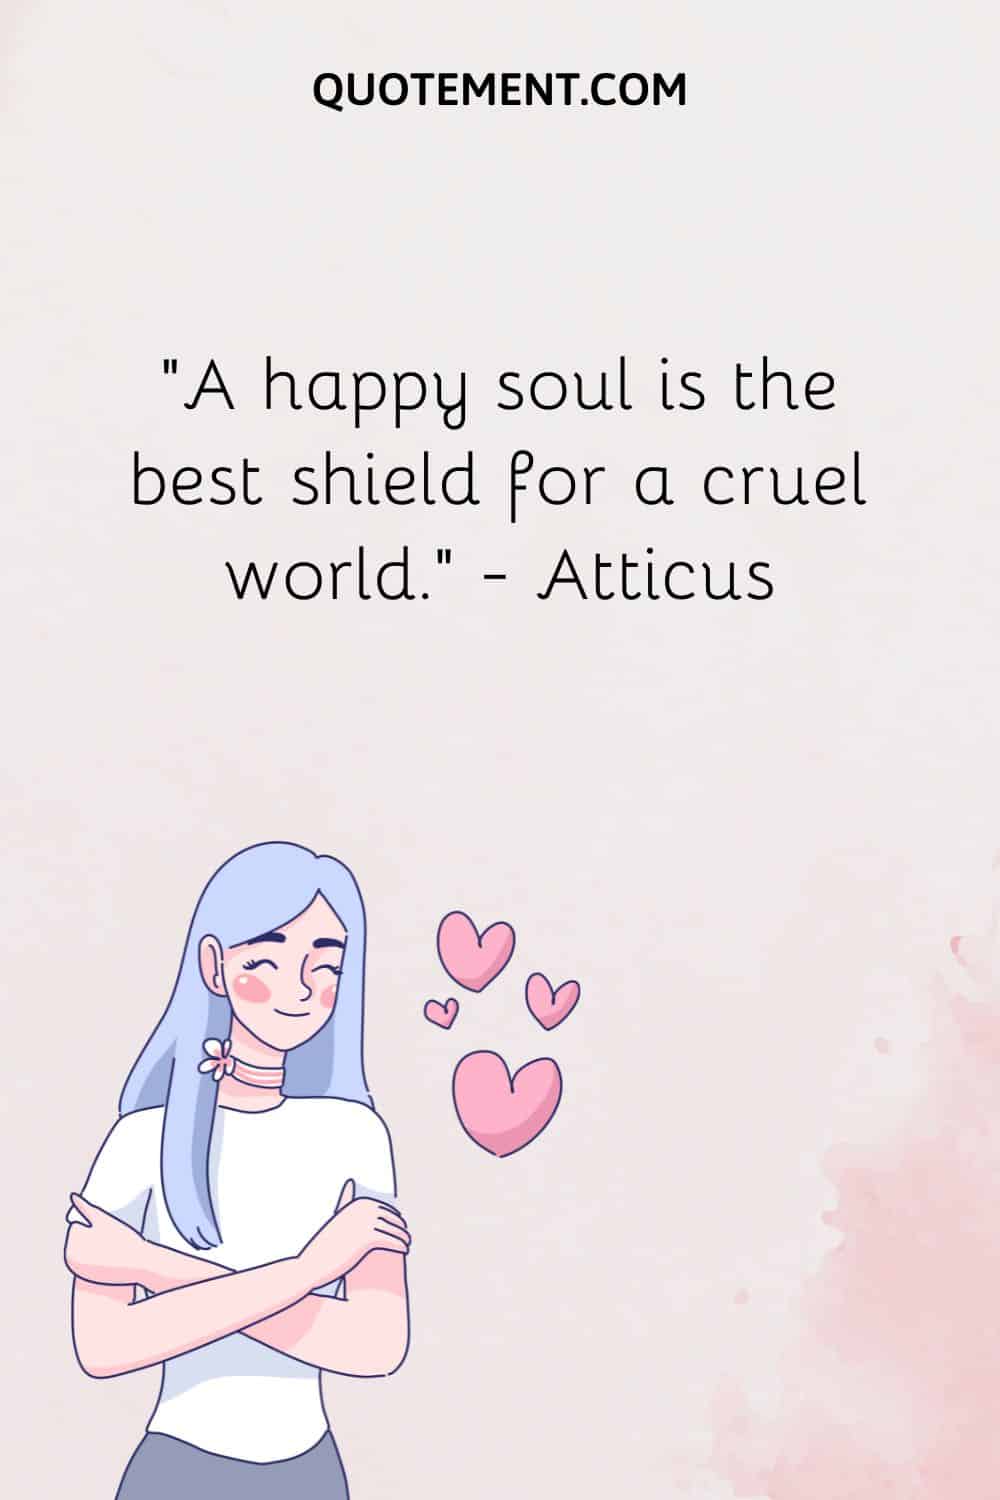 A happy soul is the best shield for a cruel world